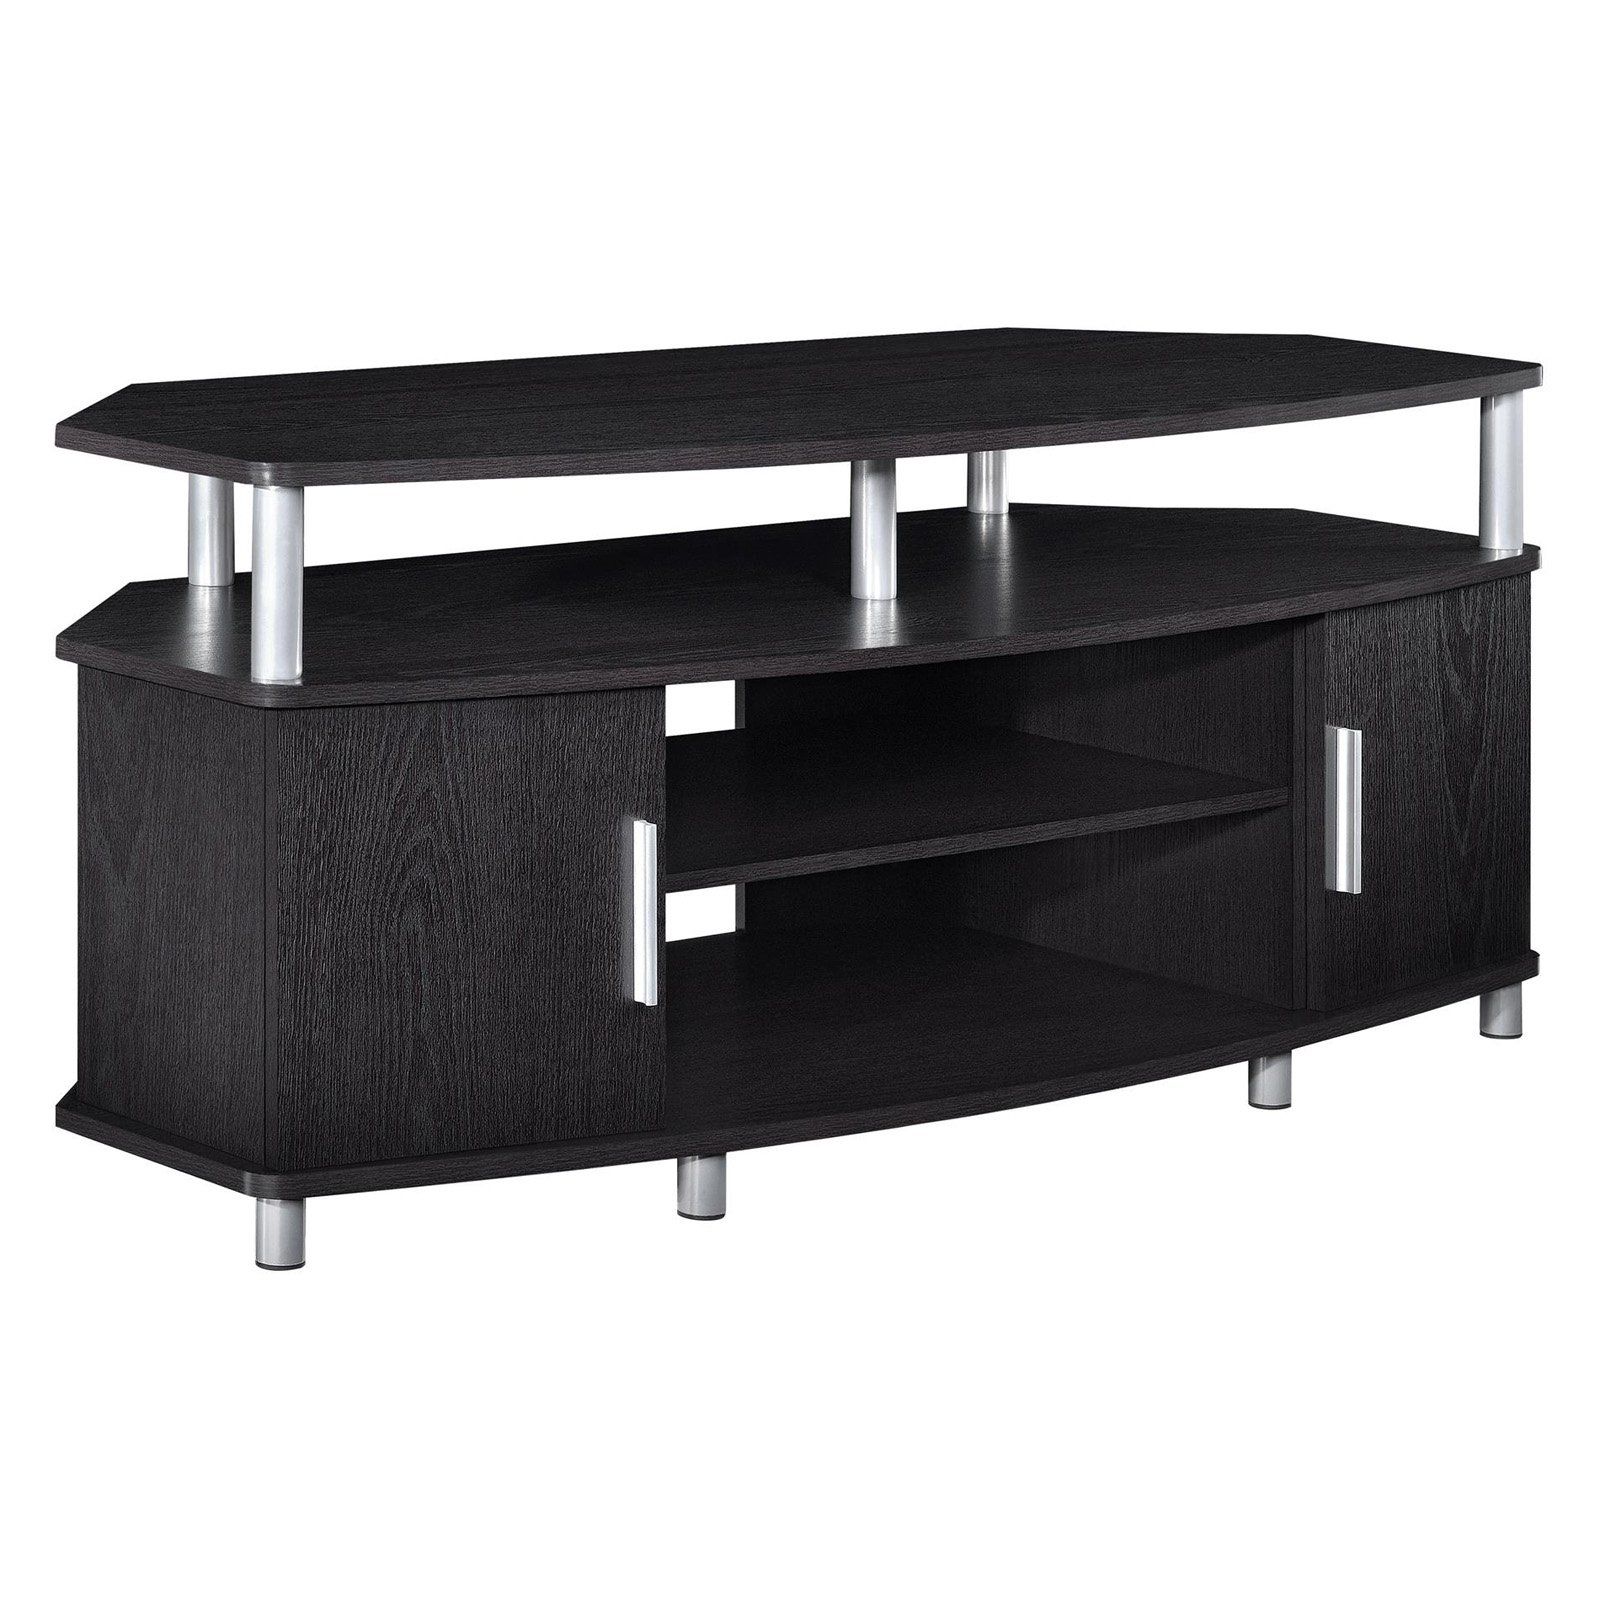 Ameriwood Home Carson Corner Tv Stand For Tvs Up To 50 In Tracy Tv Stands For Tvs Up To 50" (View 10 of 15)